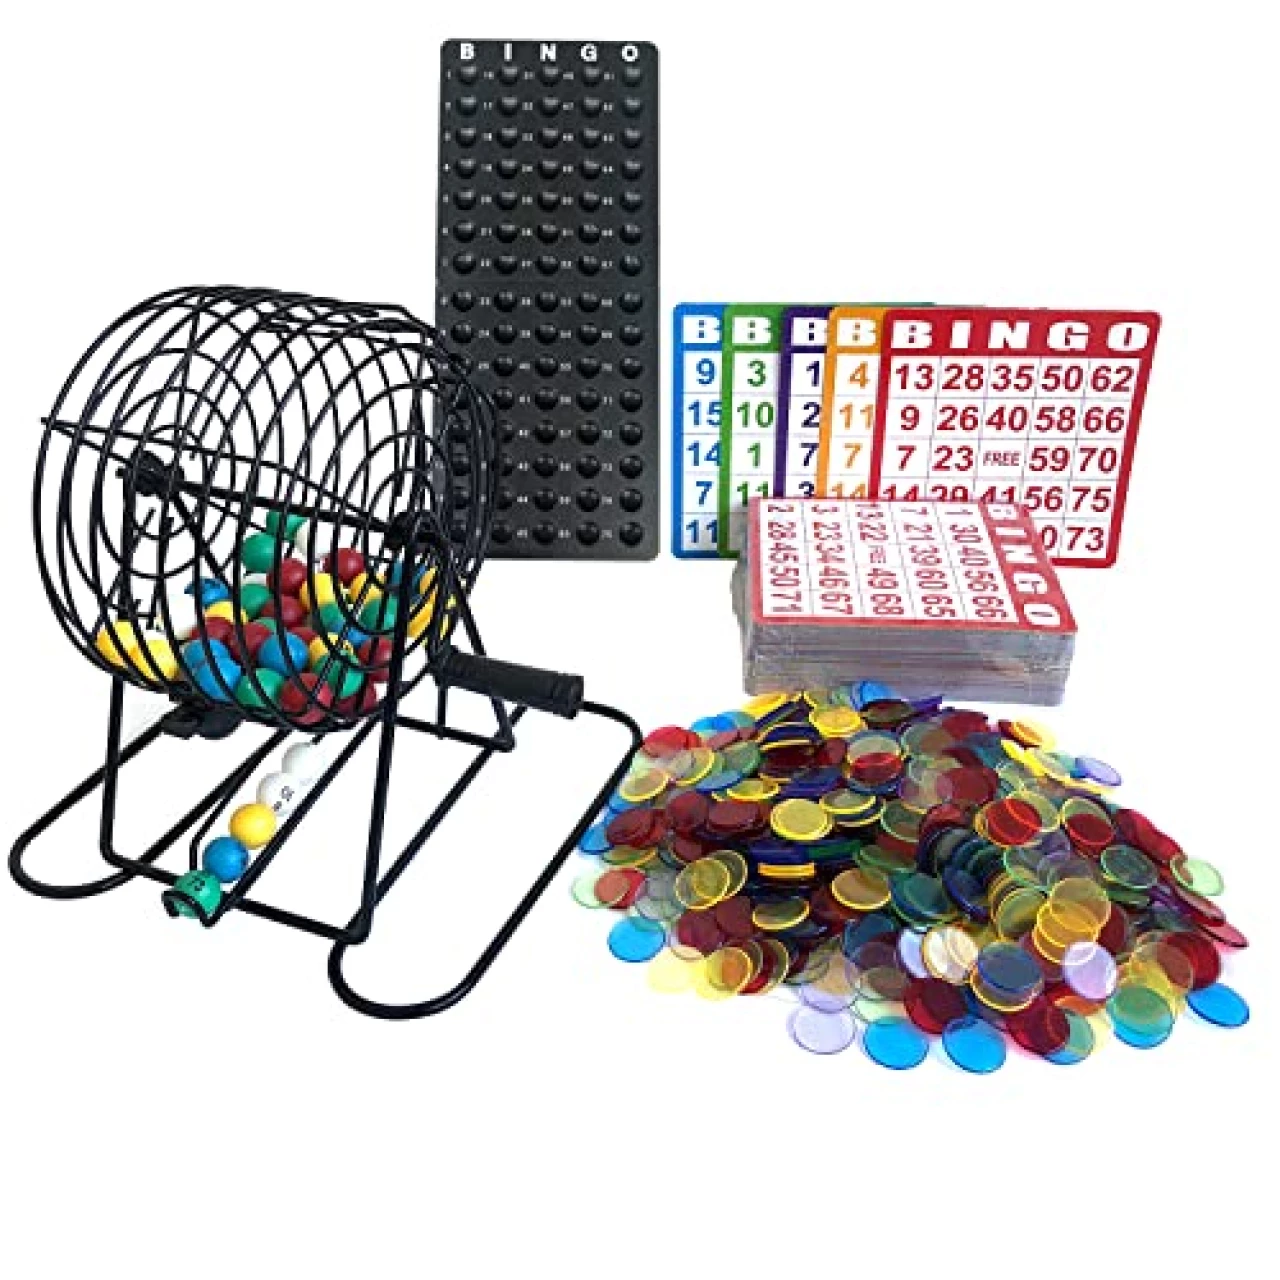 Yuanhe Deluxe Bingo Game Set-Includes Metal Cage,500 Colorful Bingo Chips,100 Bingo Cards,75 Colored Balls,Plastic Masterboard,Great for Large Groups,Parties …